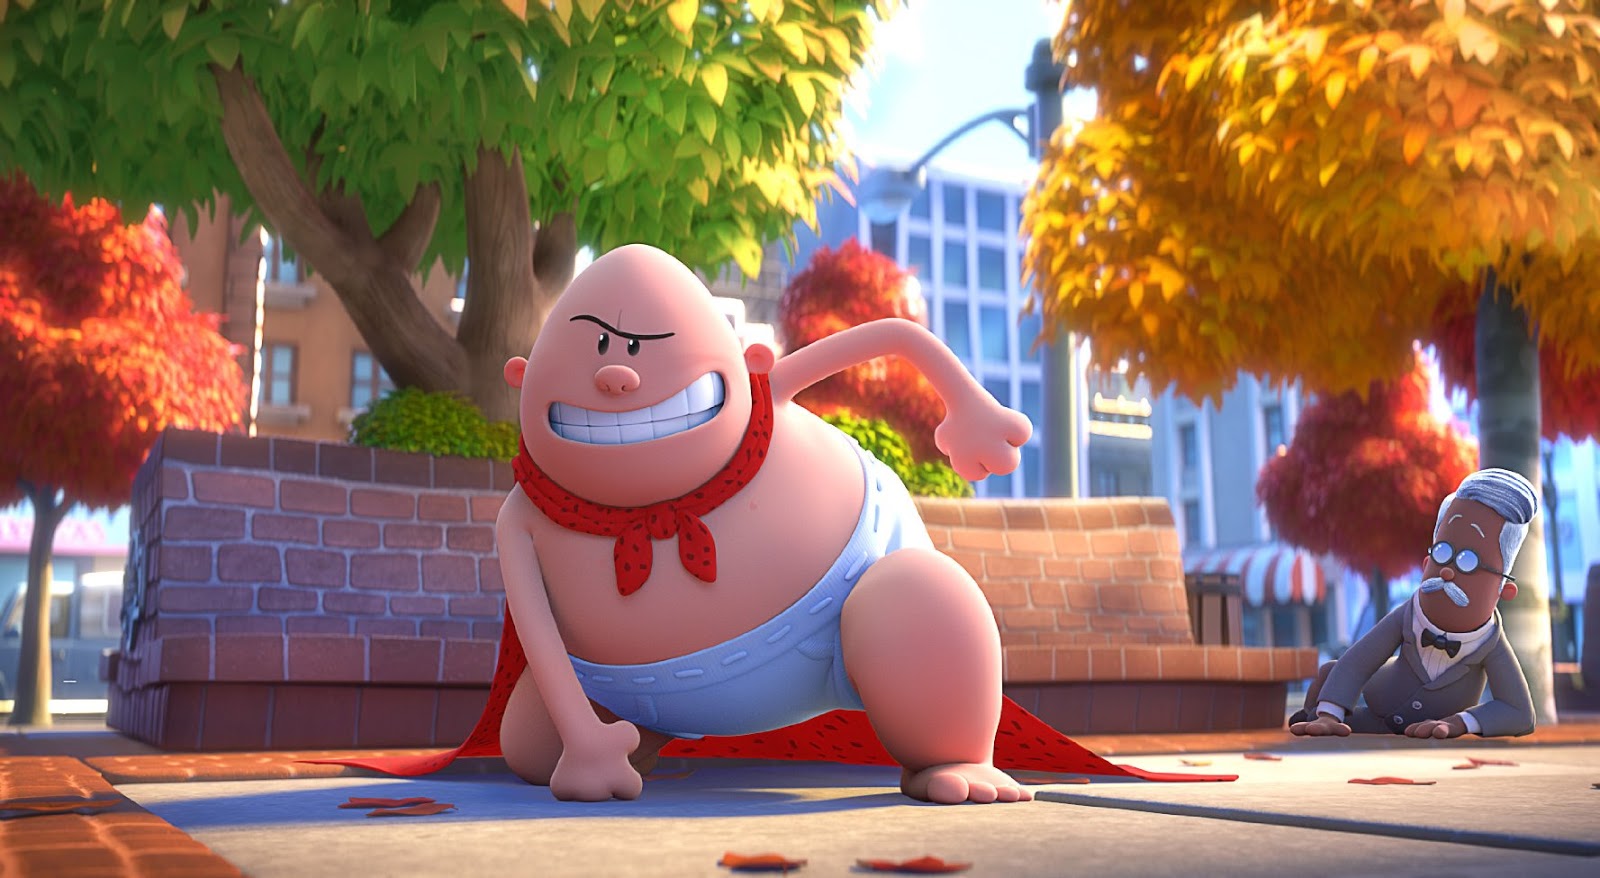 CAPTAIN UNDERPANTS THE FIRST EPIC MOVIE Trailers, Clips